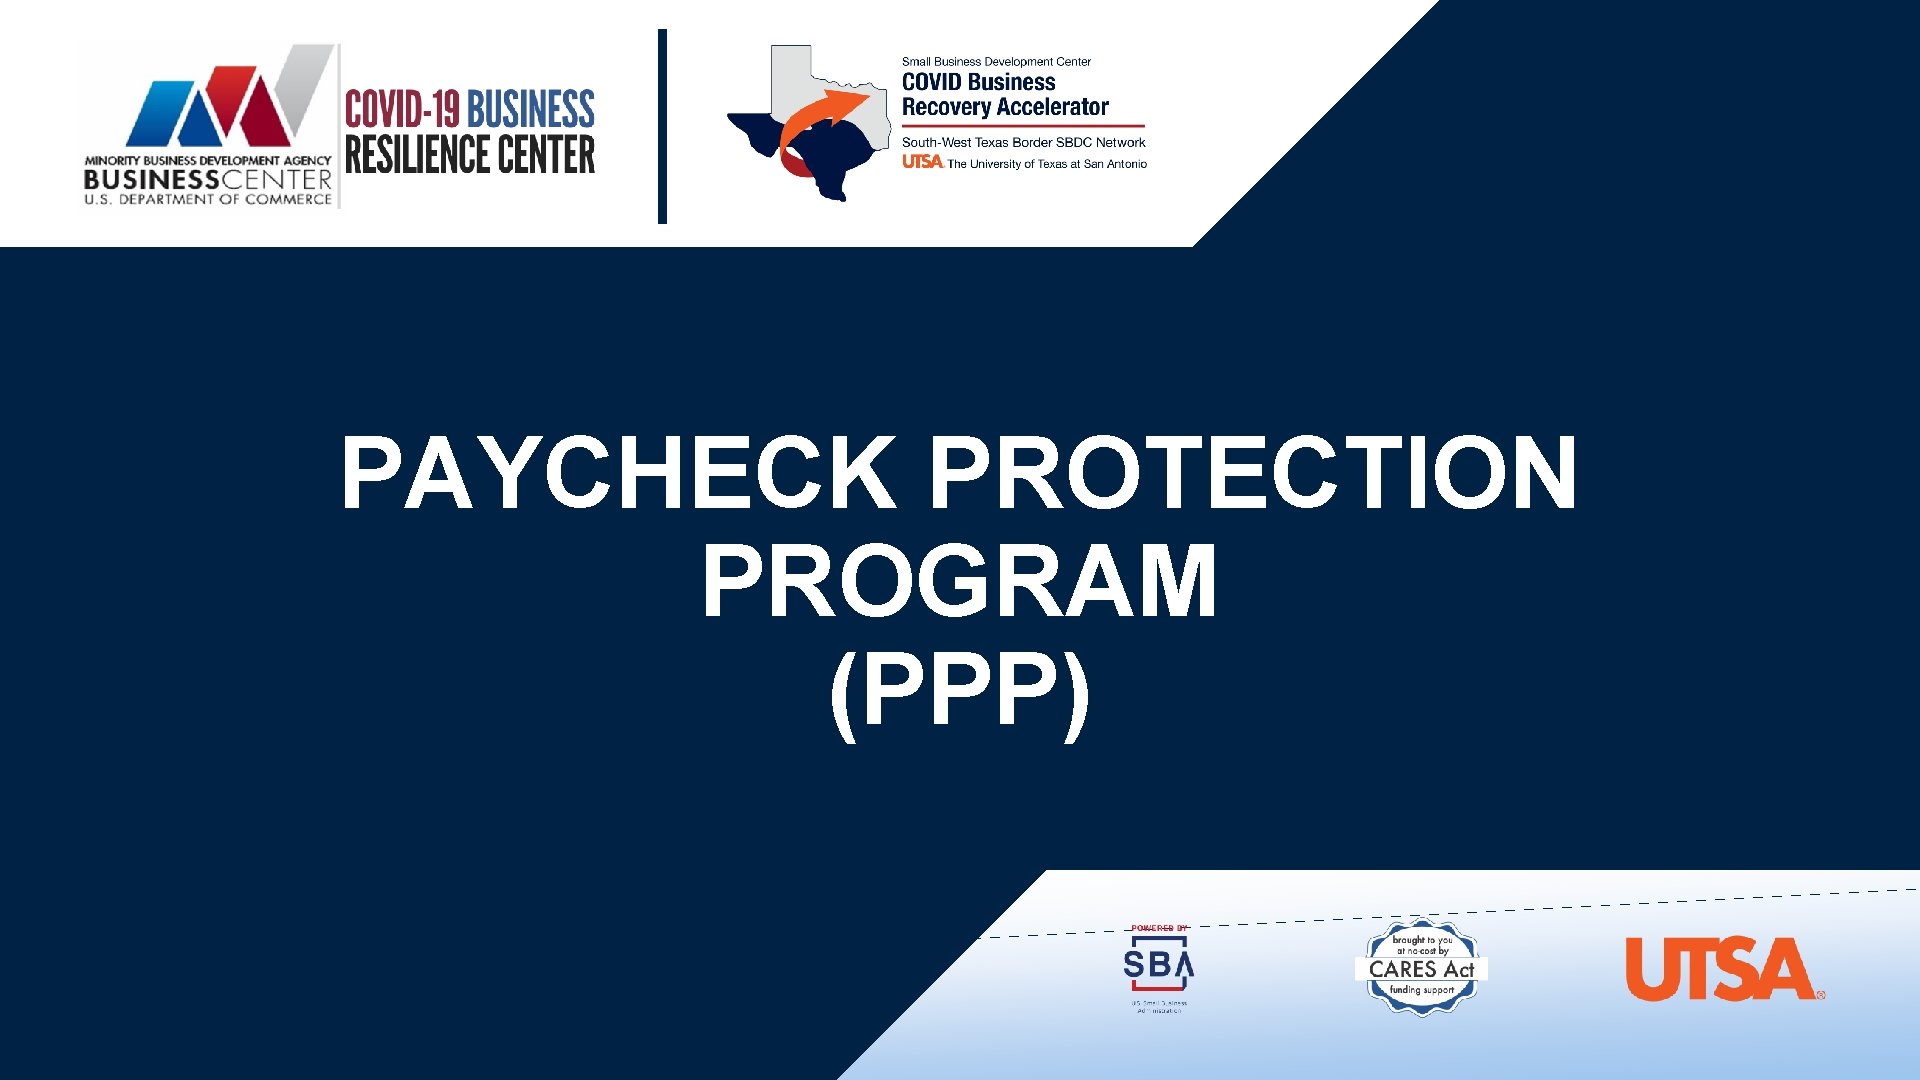 PAYCHECK PROTECTION PROGRAM (PPP) 